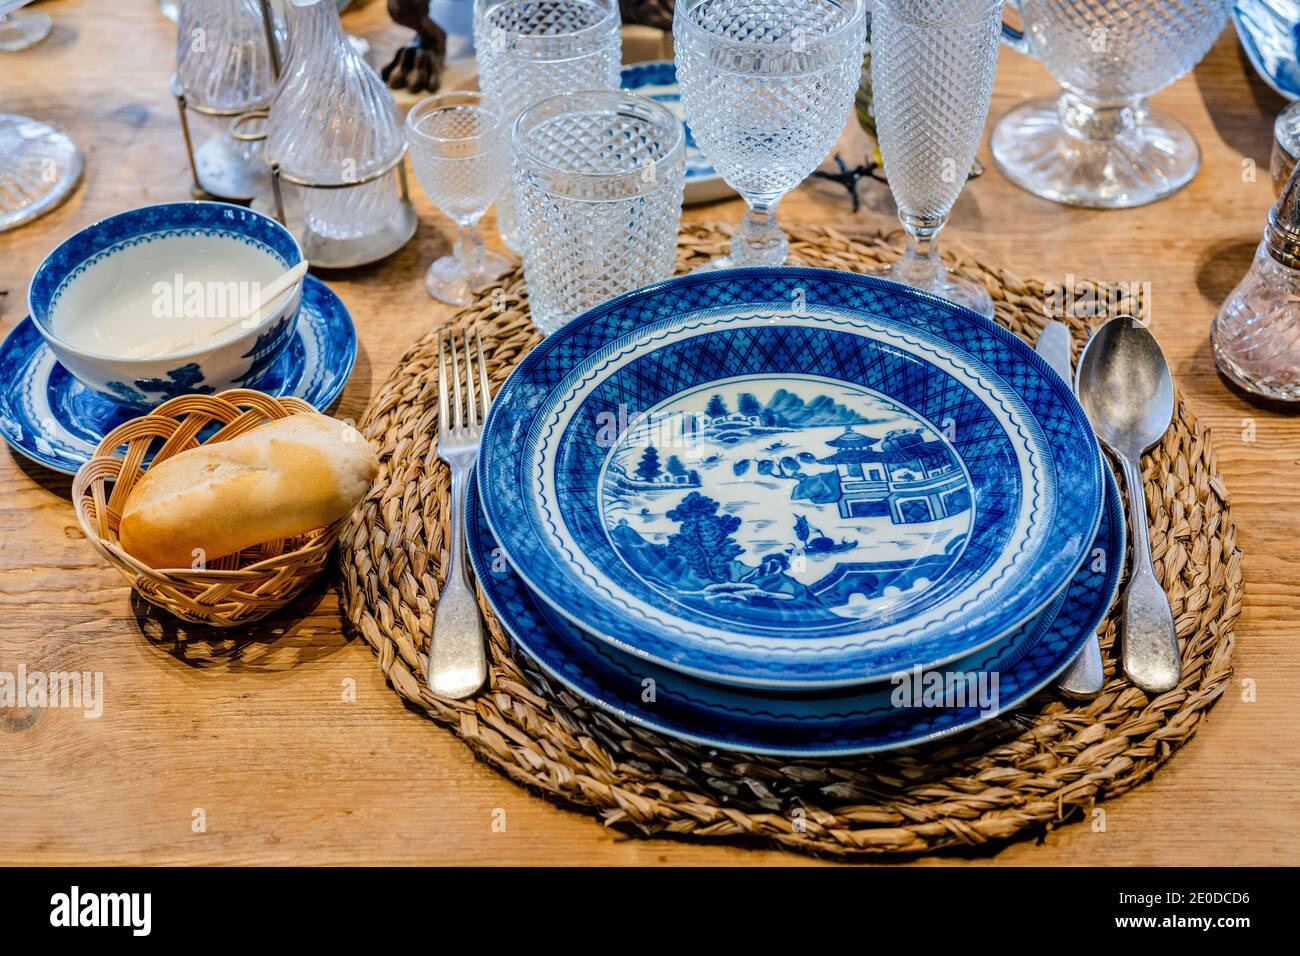 From above of blue ceramic plates served on wooden table with elegant glassware and silverware Stock Photo